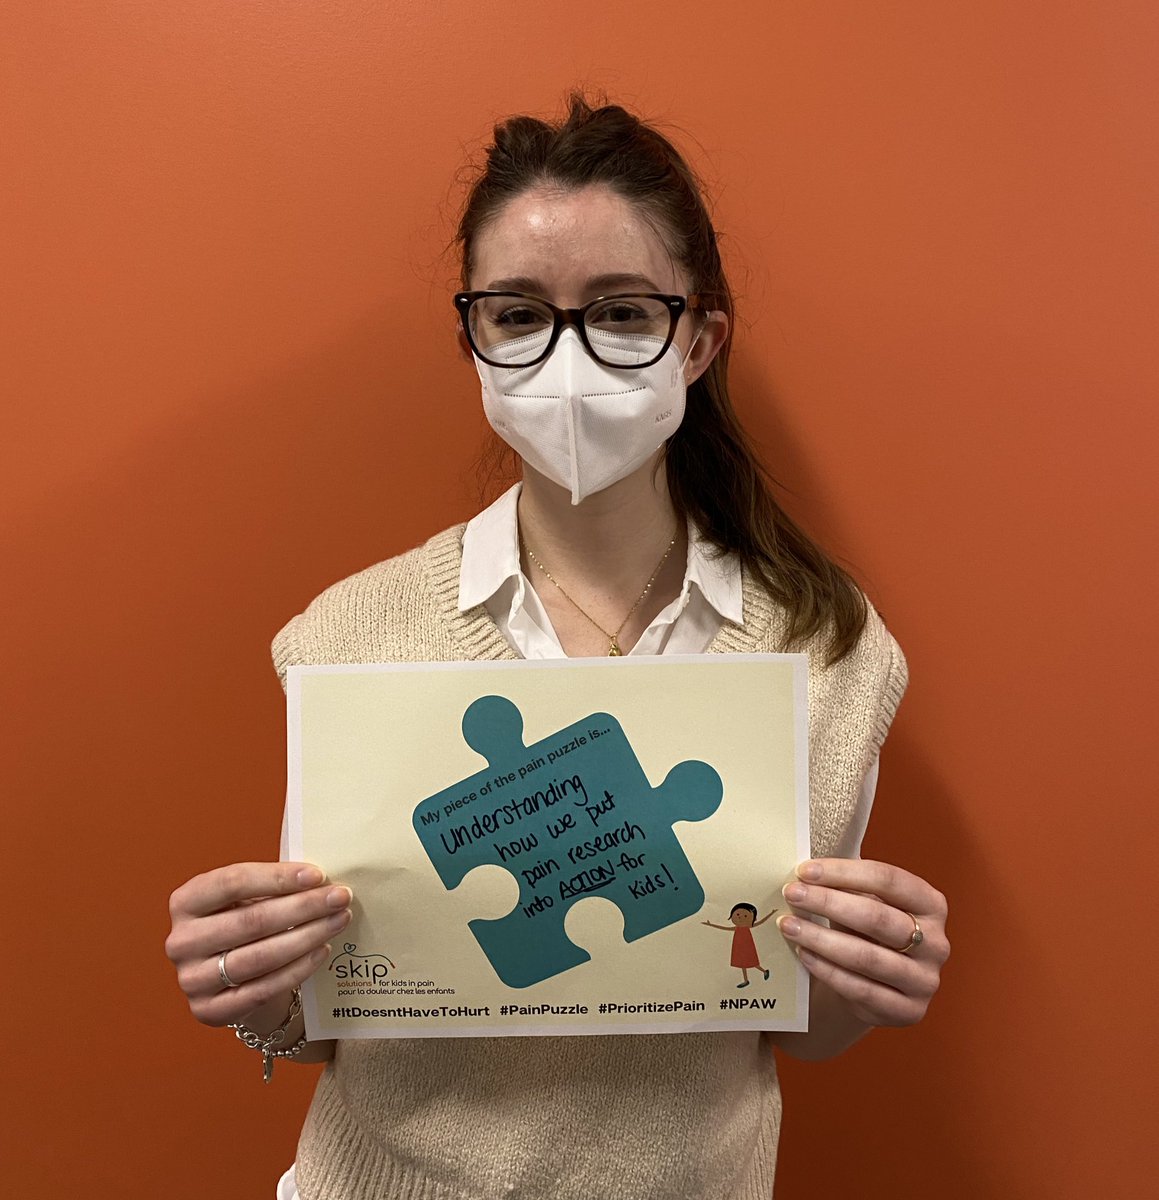 It’s National Pain Awareness Week! My piece of the puzzle is understanding how we put pain research into ACTION for kids! We all have a piece of the puzzle when it comes to improving practices in #ChildPain. What’s yours? 🧩 @KidsInPain #PainPuzzle #PrioritizePain #NPAW2022